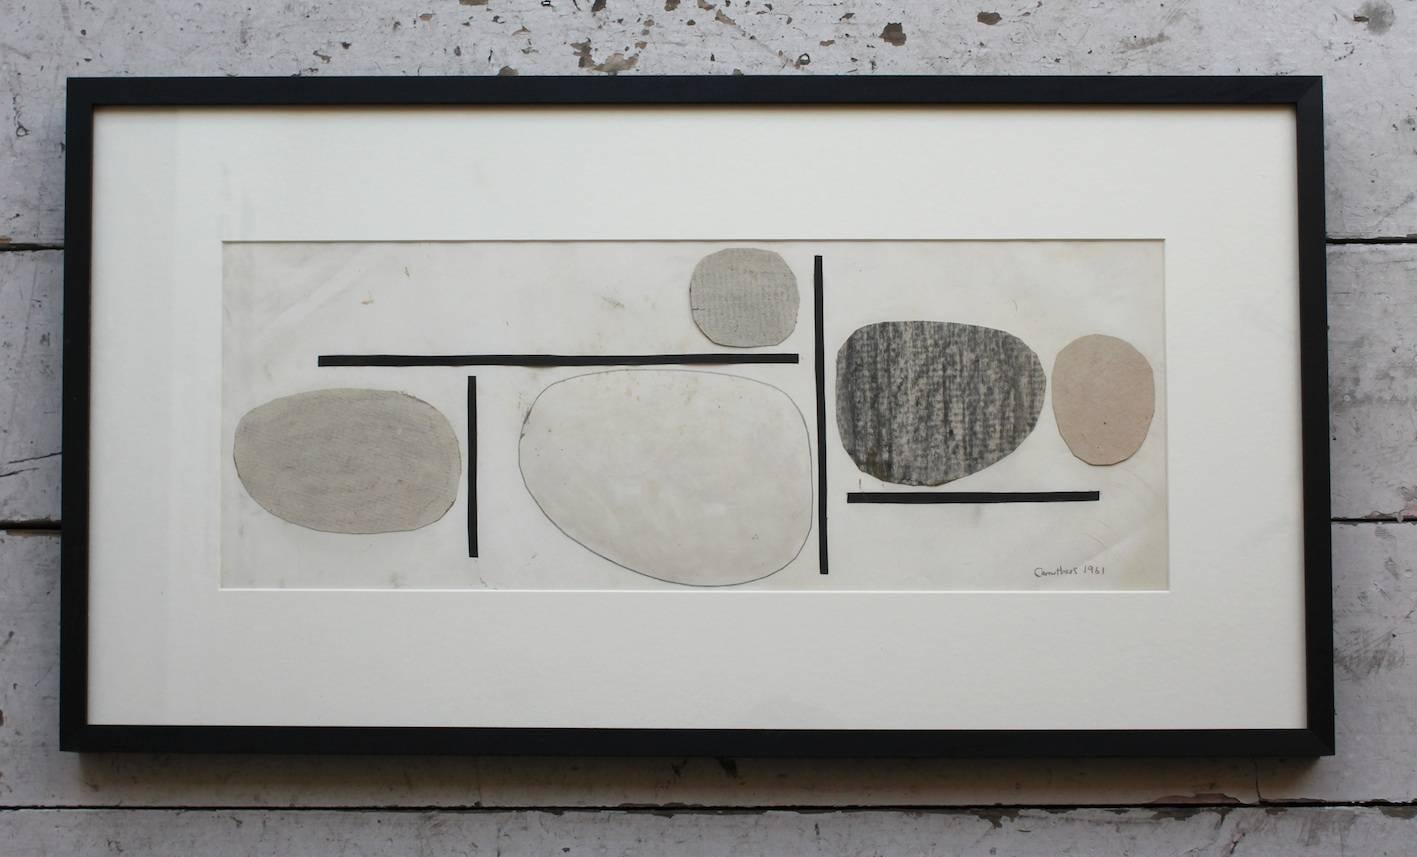 Artist: Derek Carruthers (b1935). 
Title: Divided Space IV. 
Medium: Collage, pencil and charcoal on paper. 
Signed and dated. Titled on verso. 
Date: 1961. 

Dimensions (framed): 73 x 38 cm.